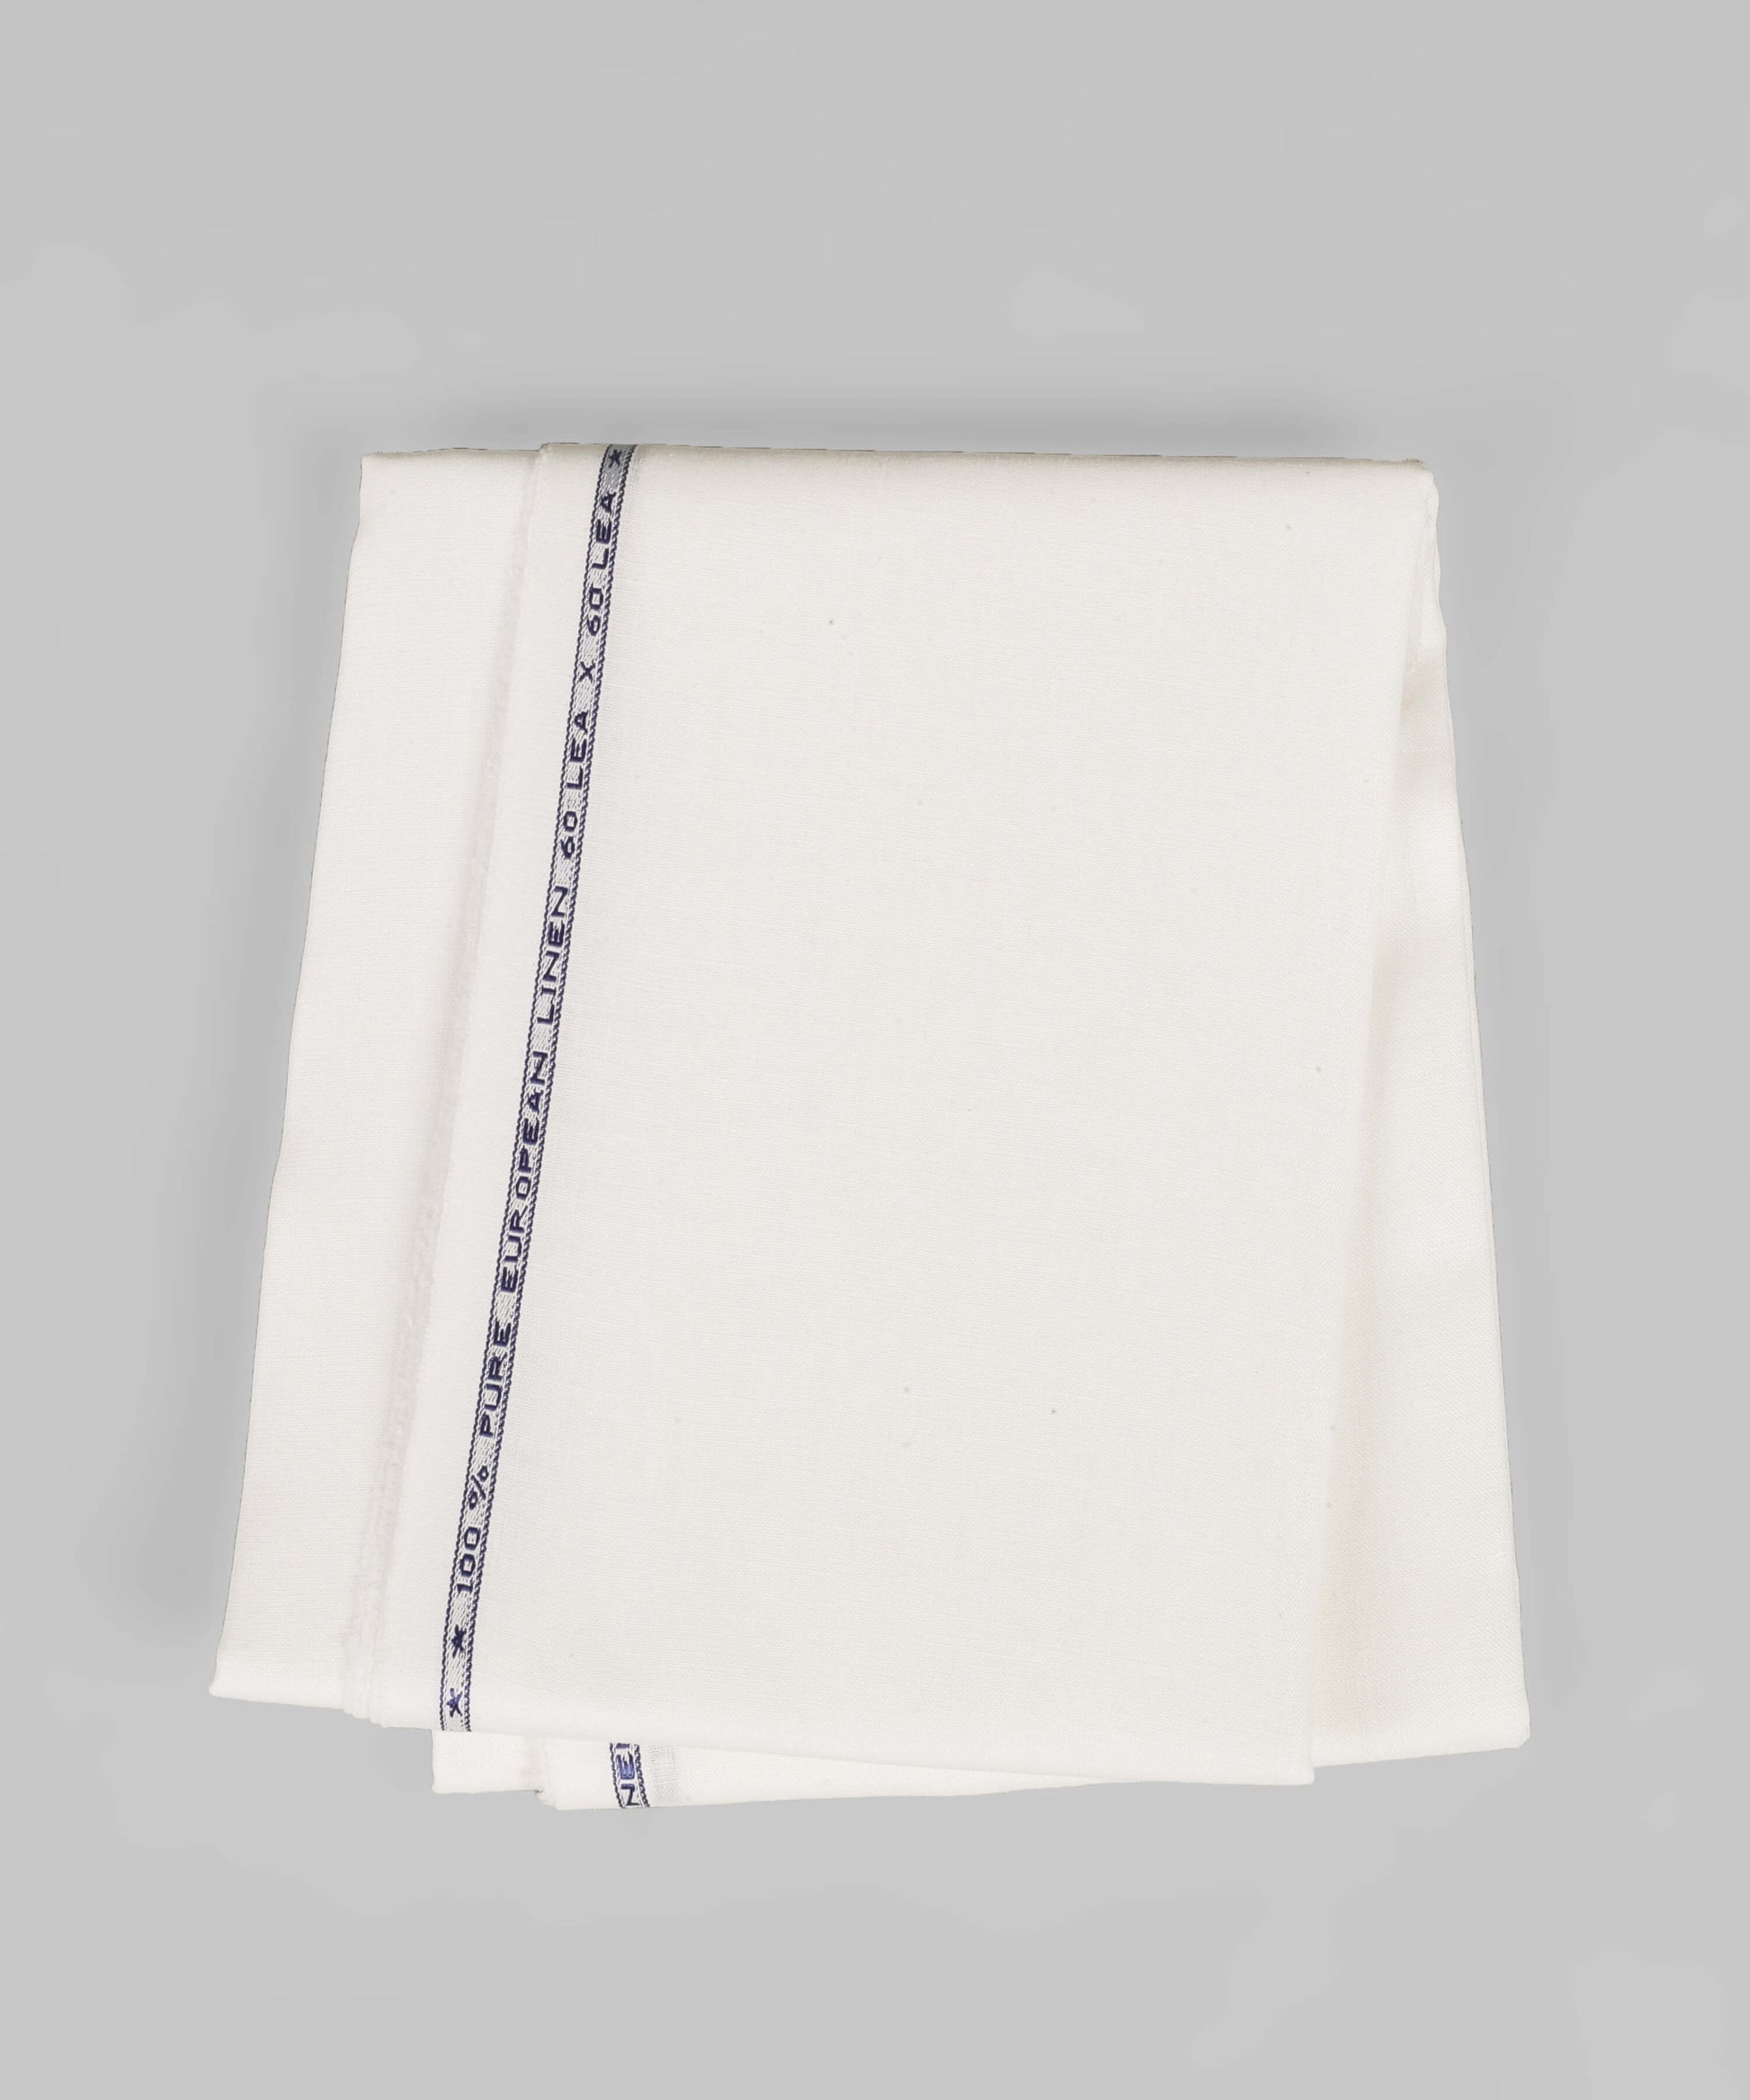 Pure White unstitched mill made pure linen full width shirt piece for one full sleev shirt